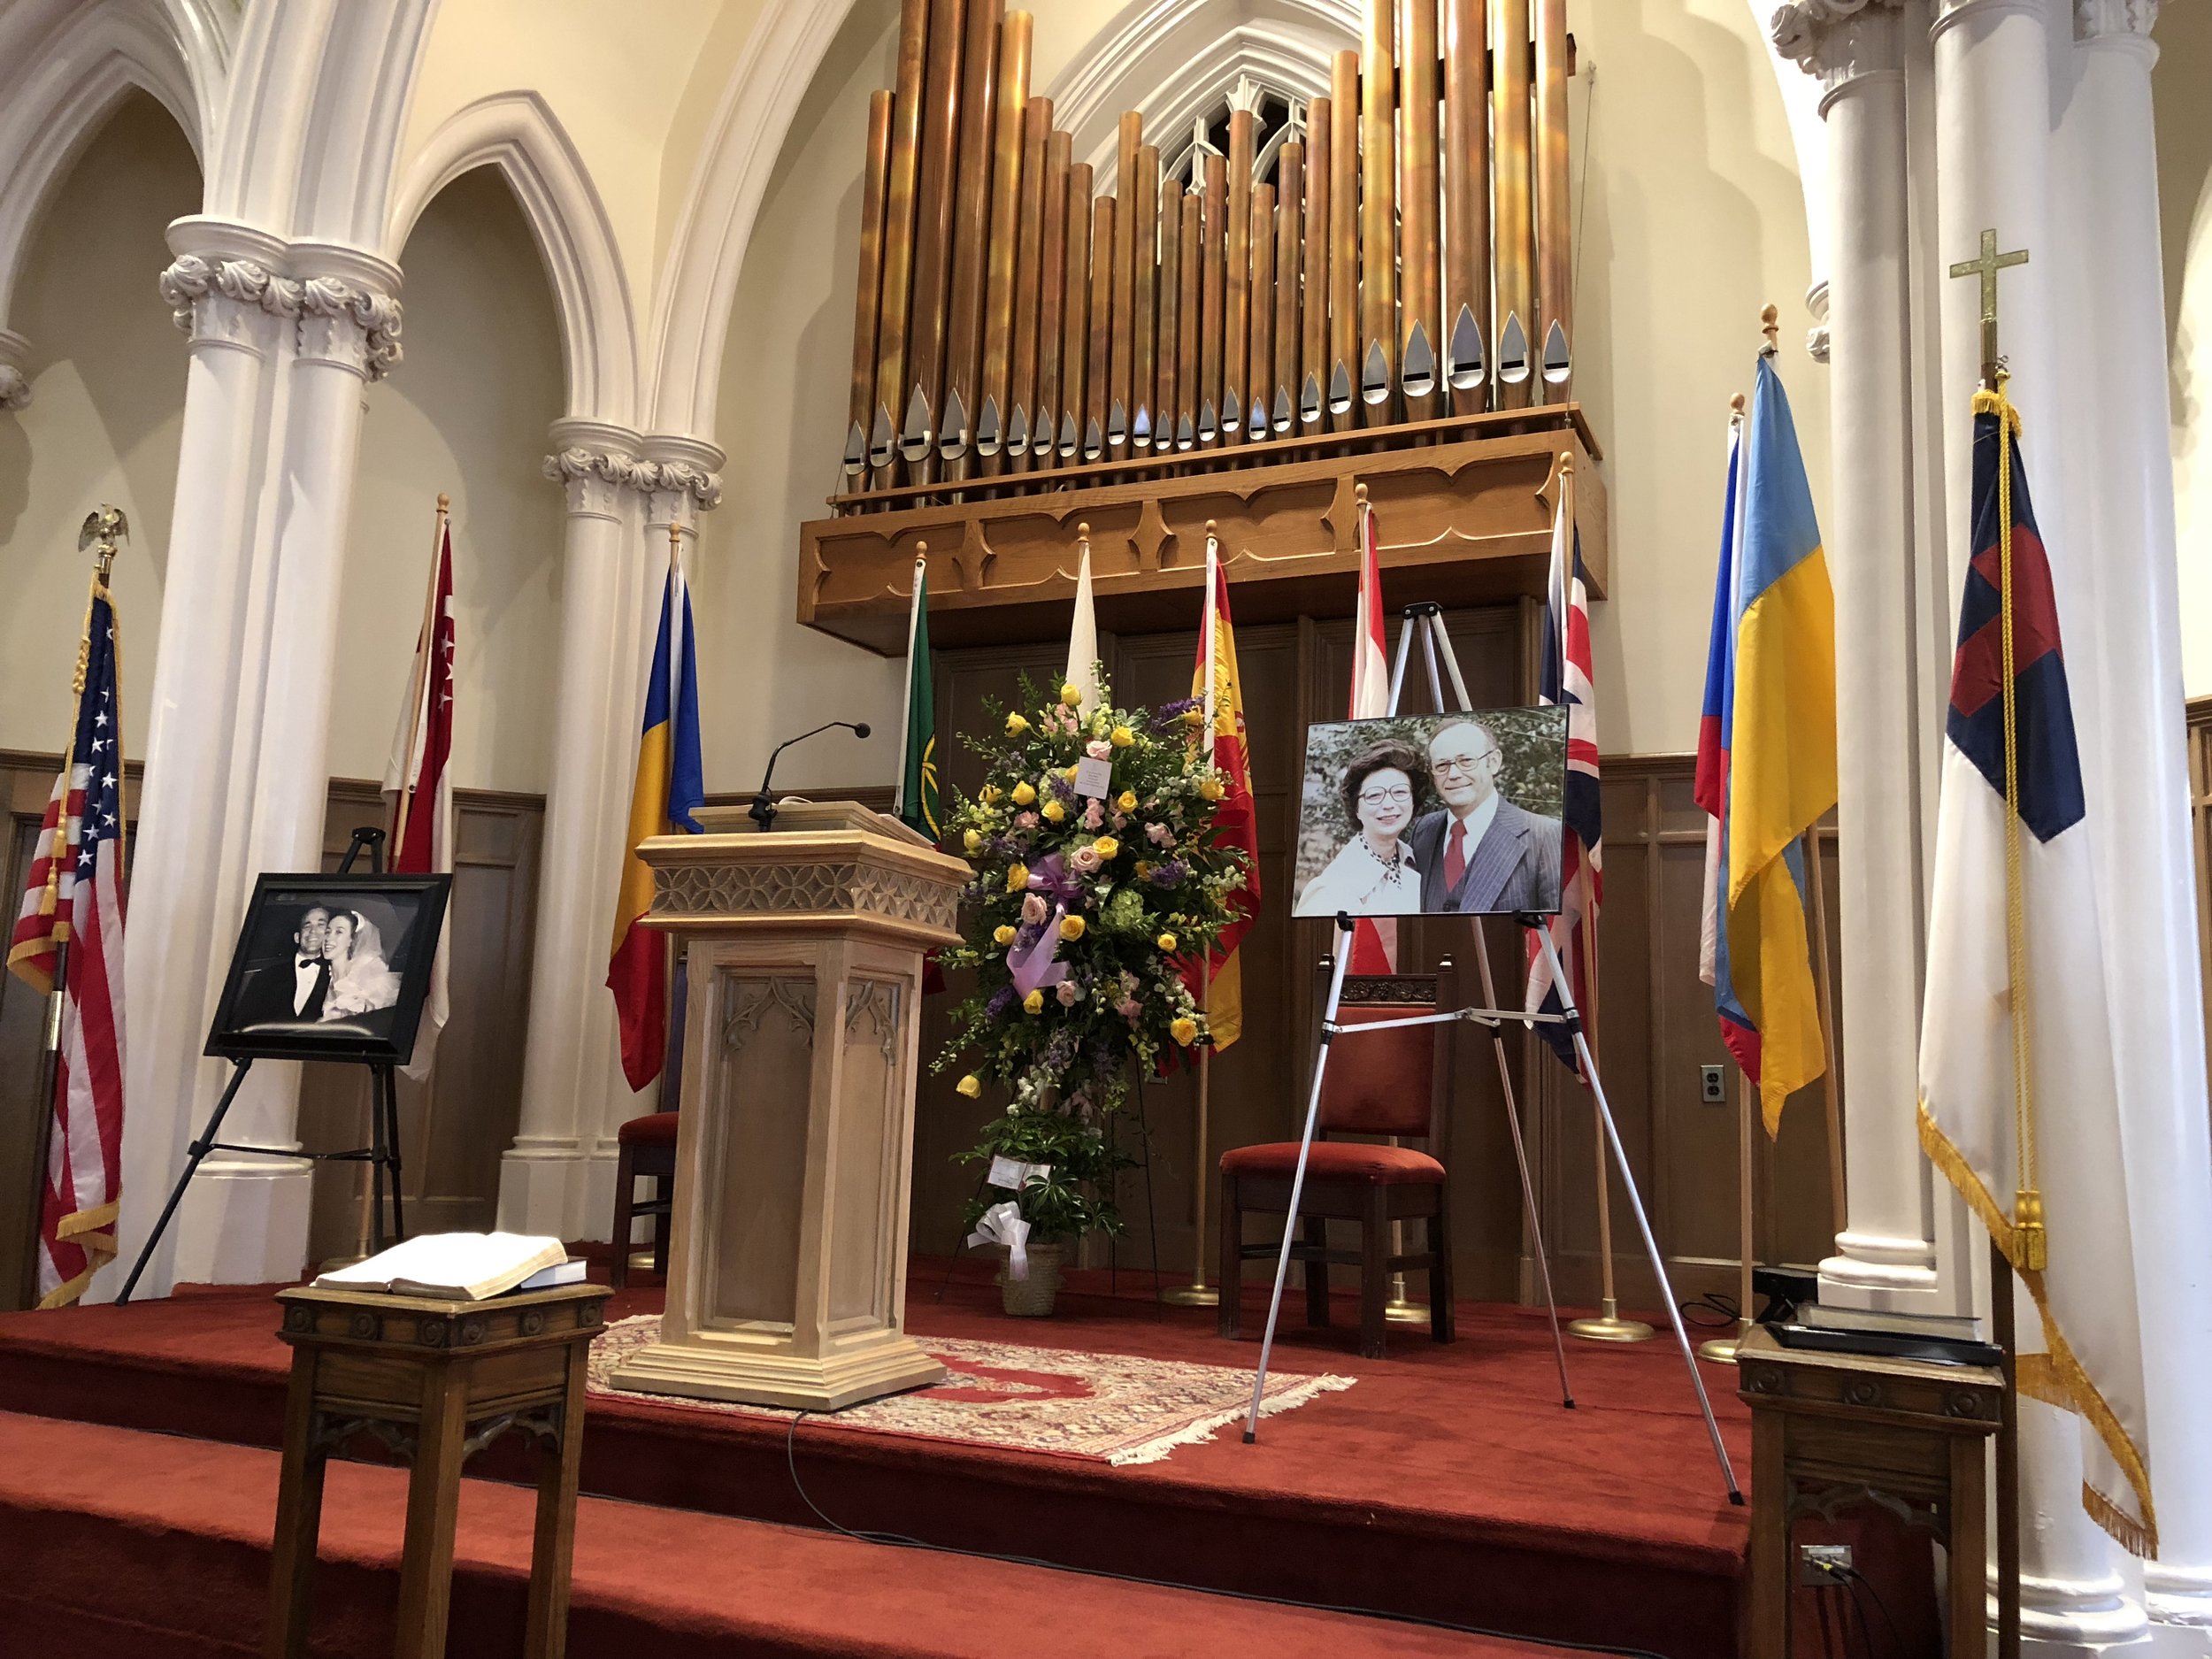 Flags of the nations were on display at Betty Malone’s funeral, symbolizing her love for the nations and passion for the Great Commission.